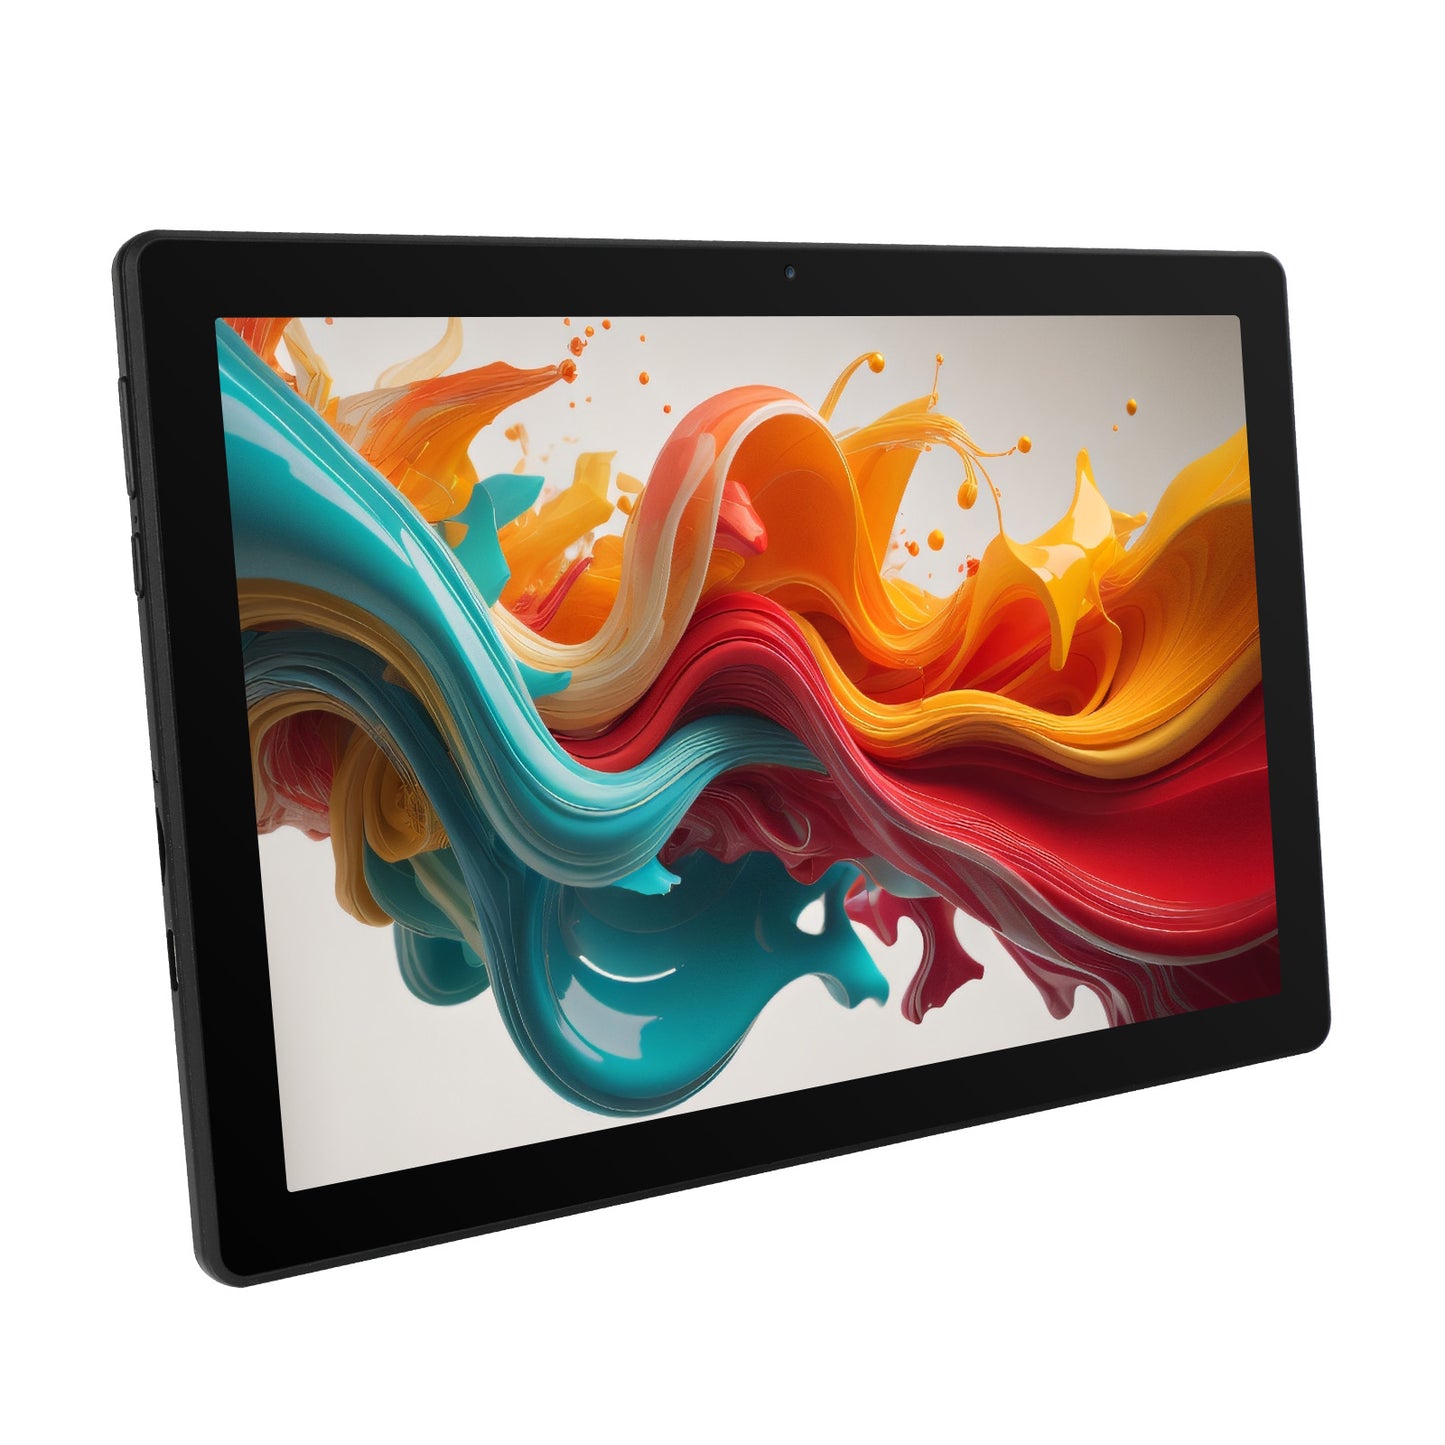 Tablet 10 inch, Android 14 Tablet with 1280*800 IPS, Dual Camera, 5000mAh Battery, 3GB RAM + 32GB ROM, Bluetooth 5.2, Tablet PC with 6G Wi-Fi. (Black)